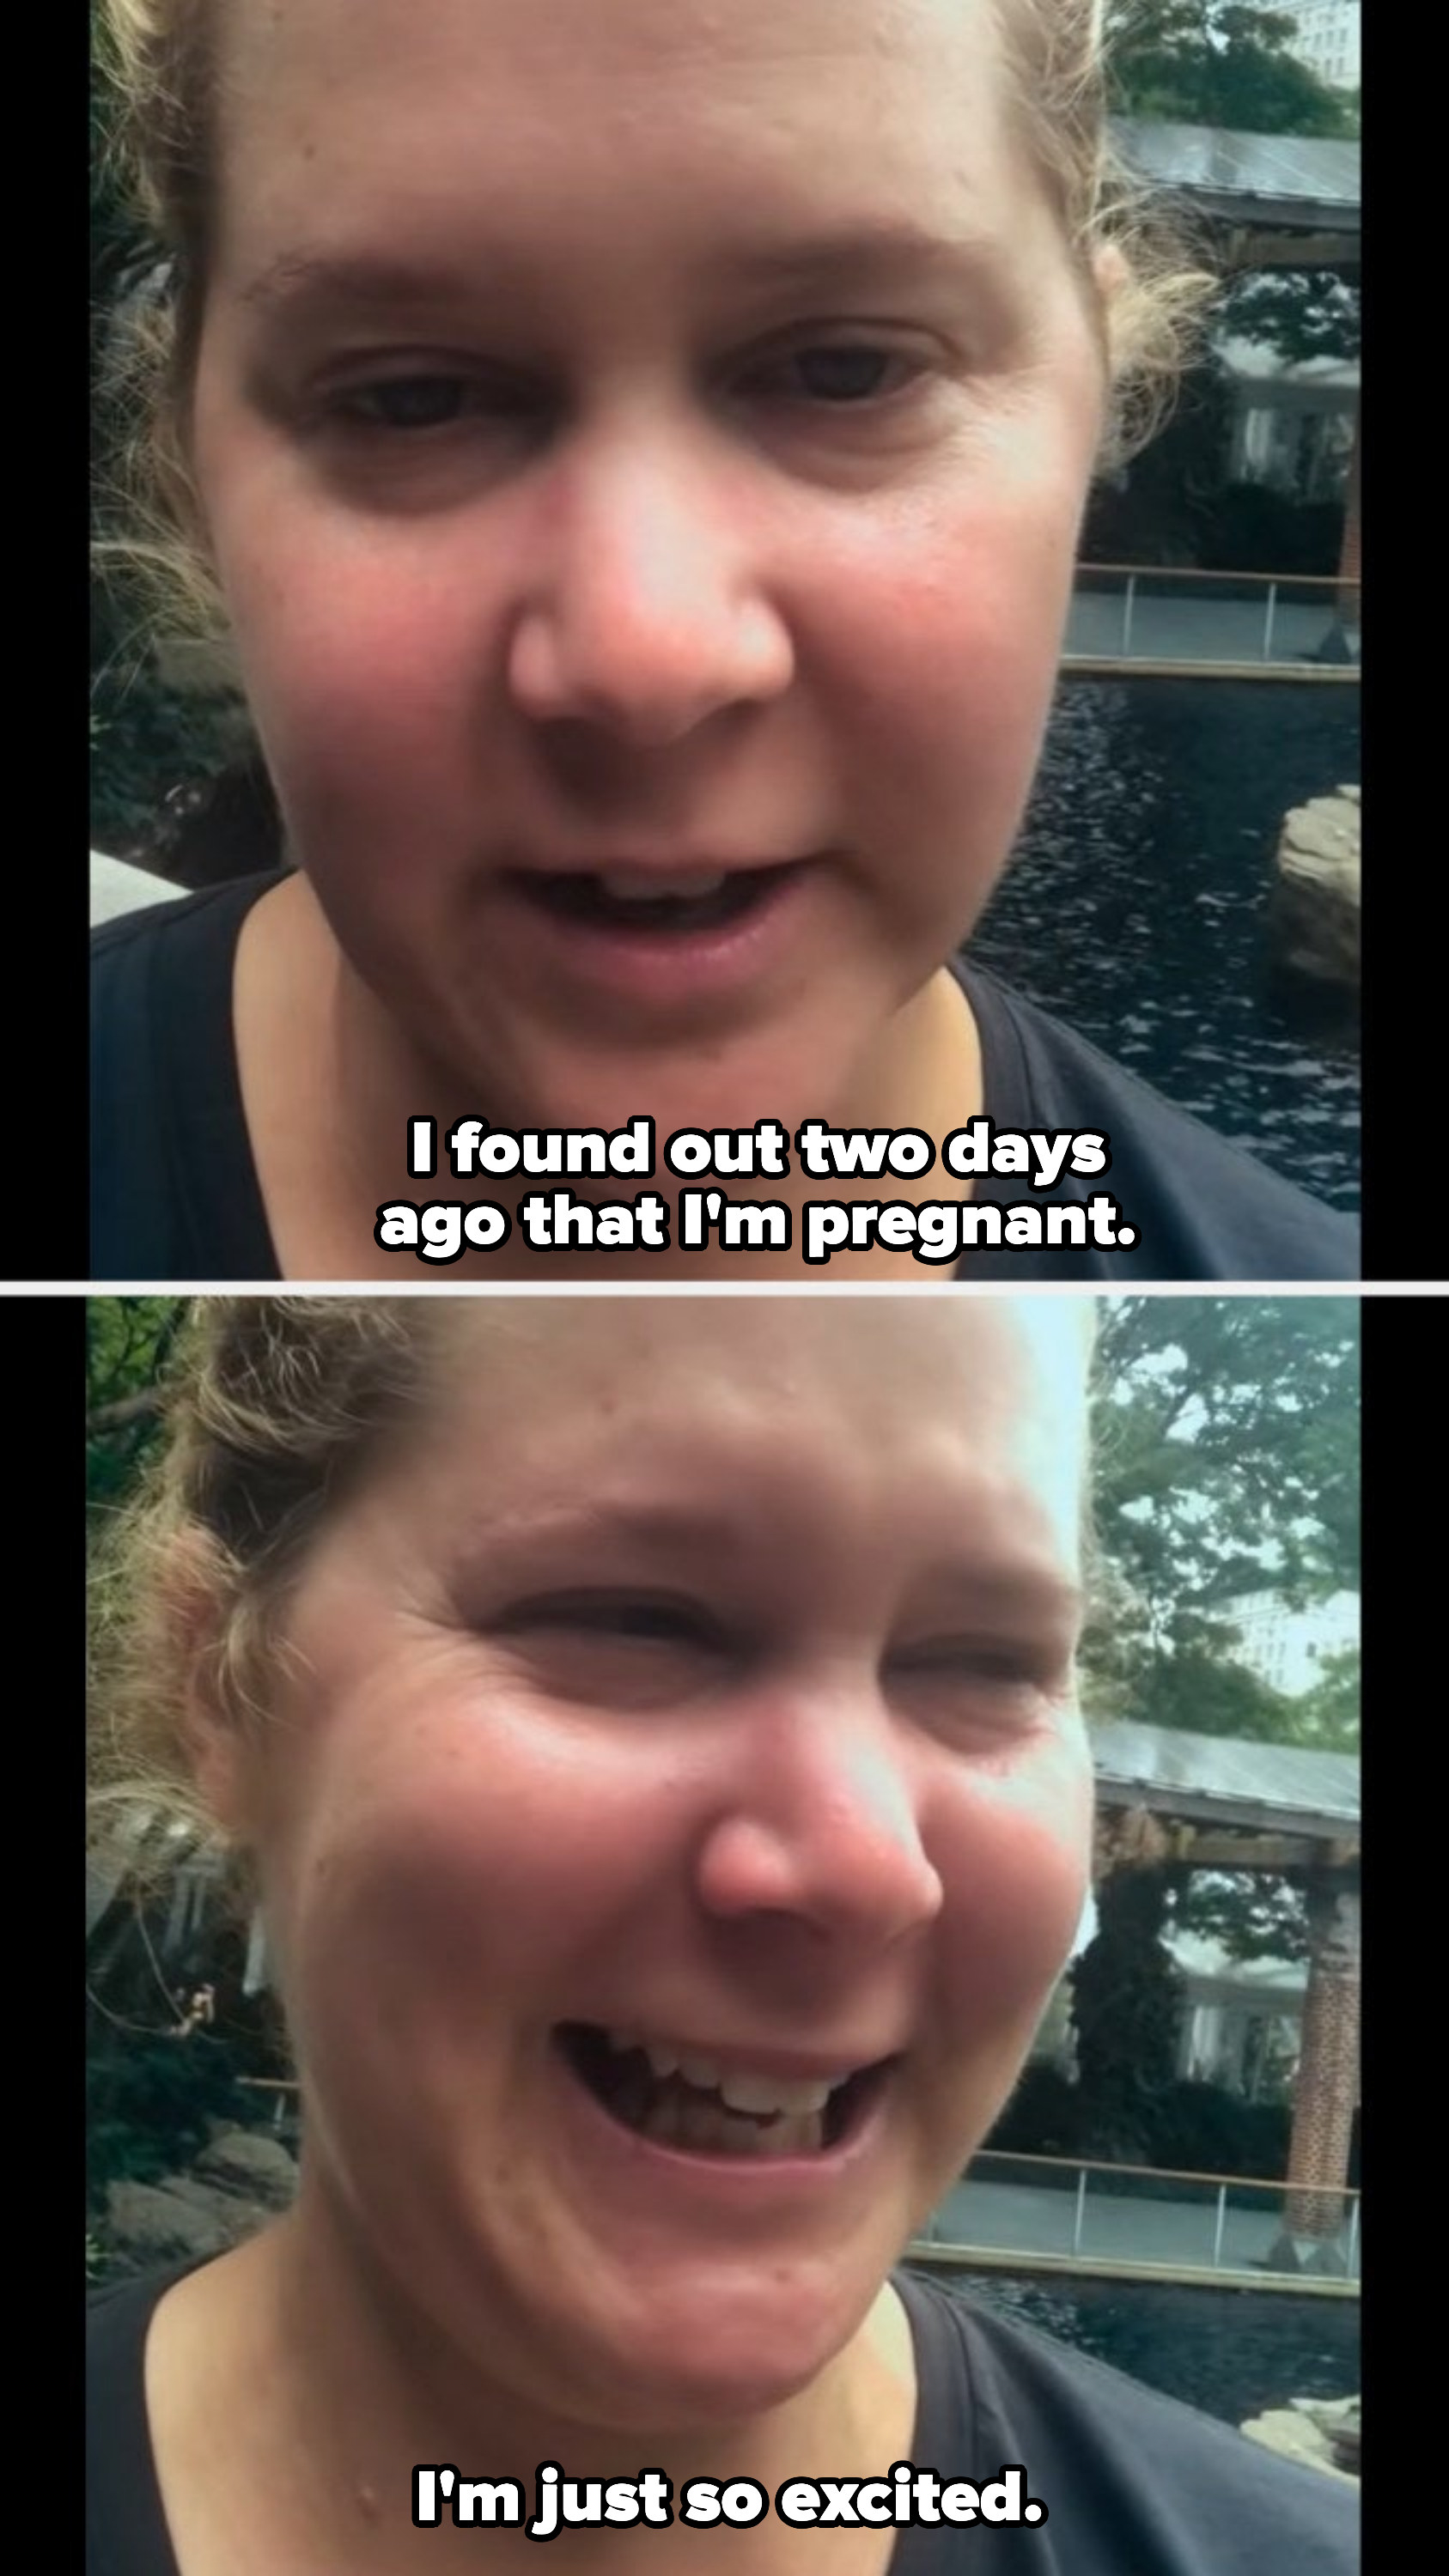 Amy Schumer: &quot;I found out two days ago that I&#x27;m pregnant; I&#x27;m just so excited&quot;